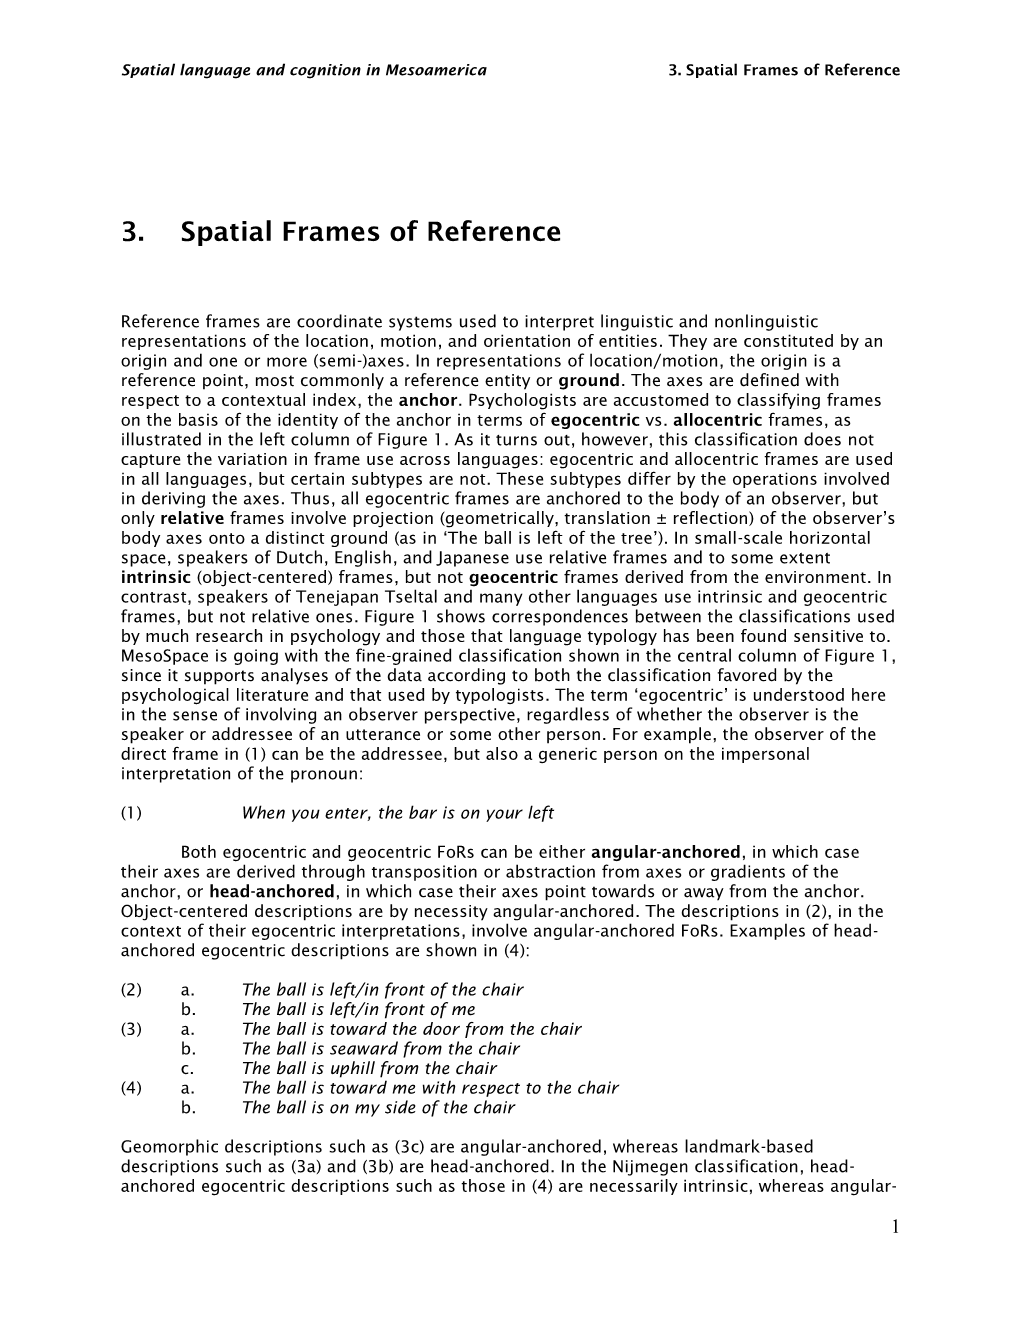 Spatial Frames of Reference